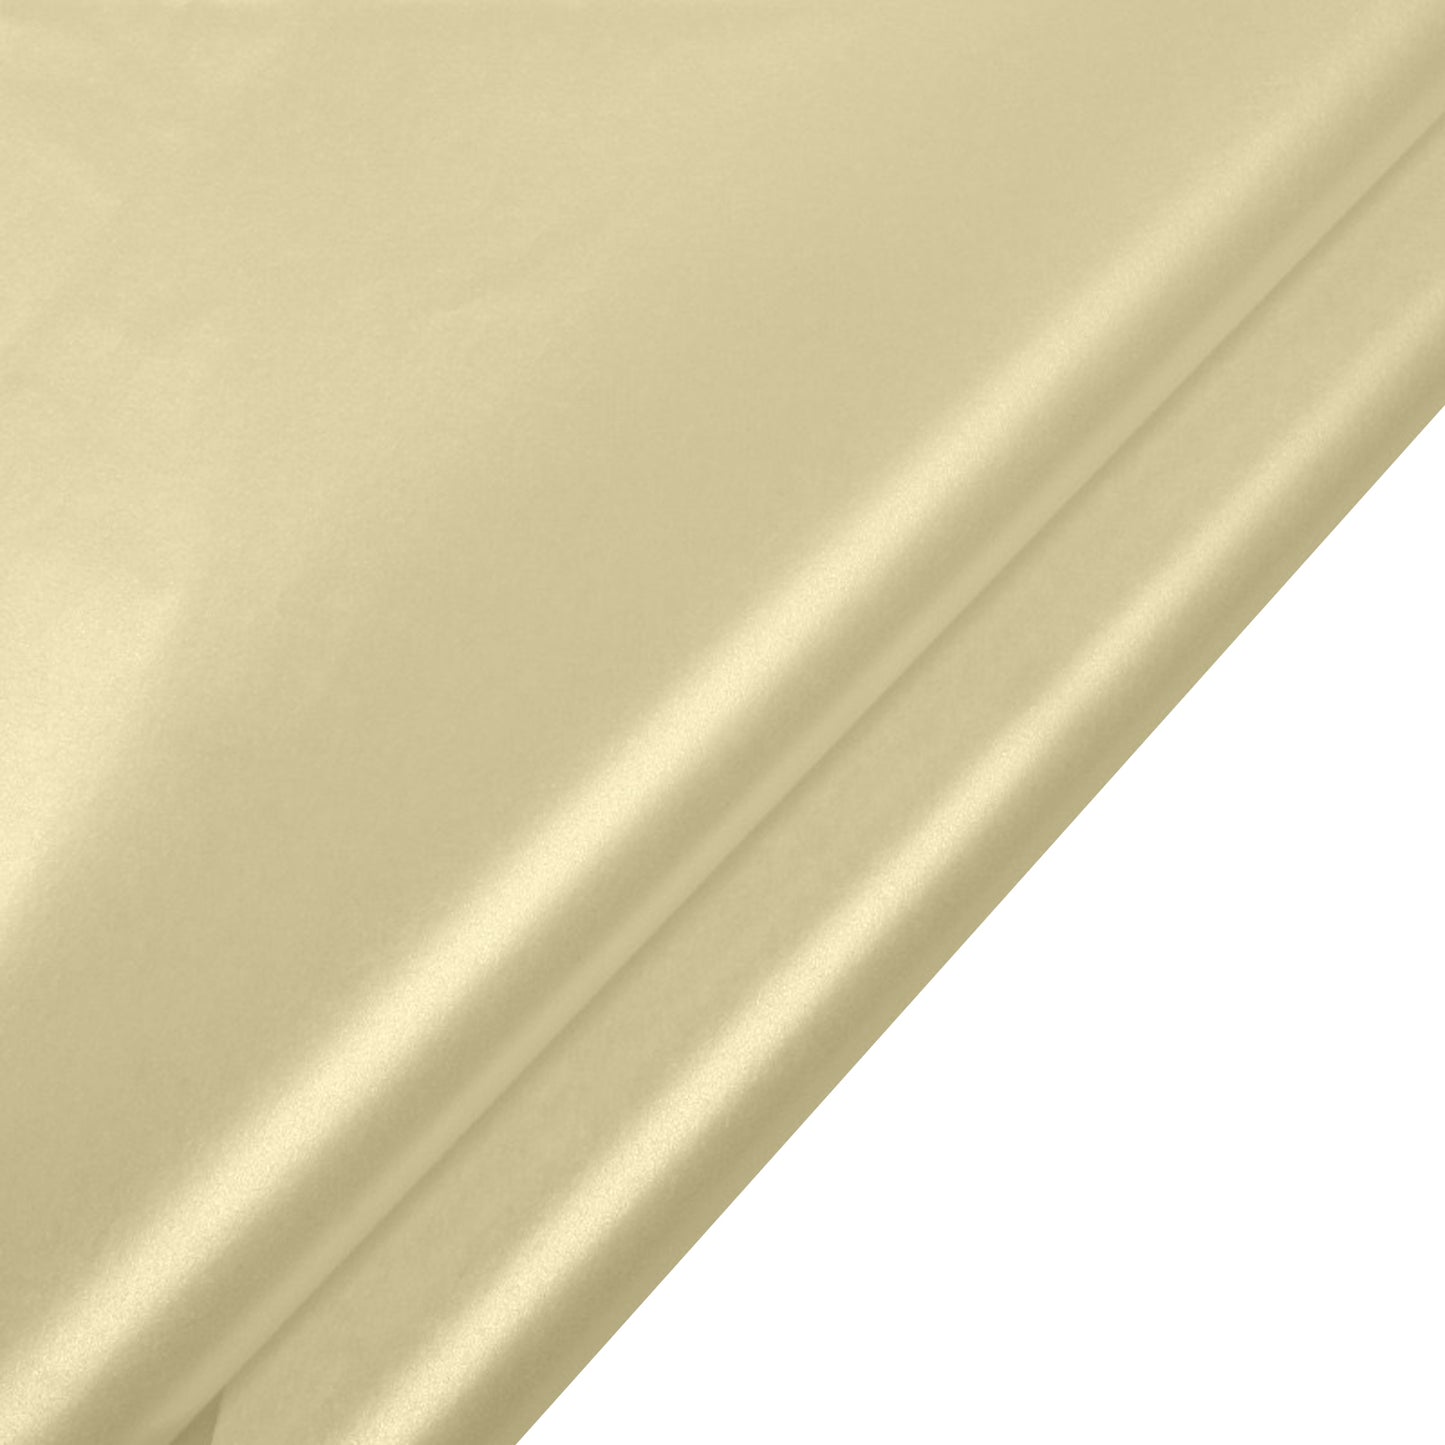 100sheets Light Yellow 19.7x27.6 inches Pearlized Tissue Paper; $0.26/pc